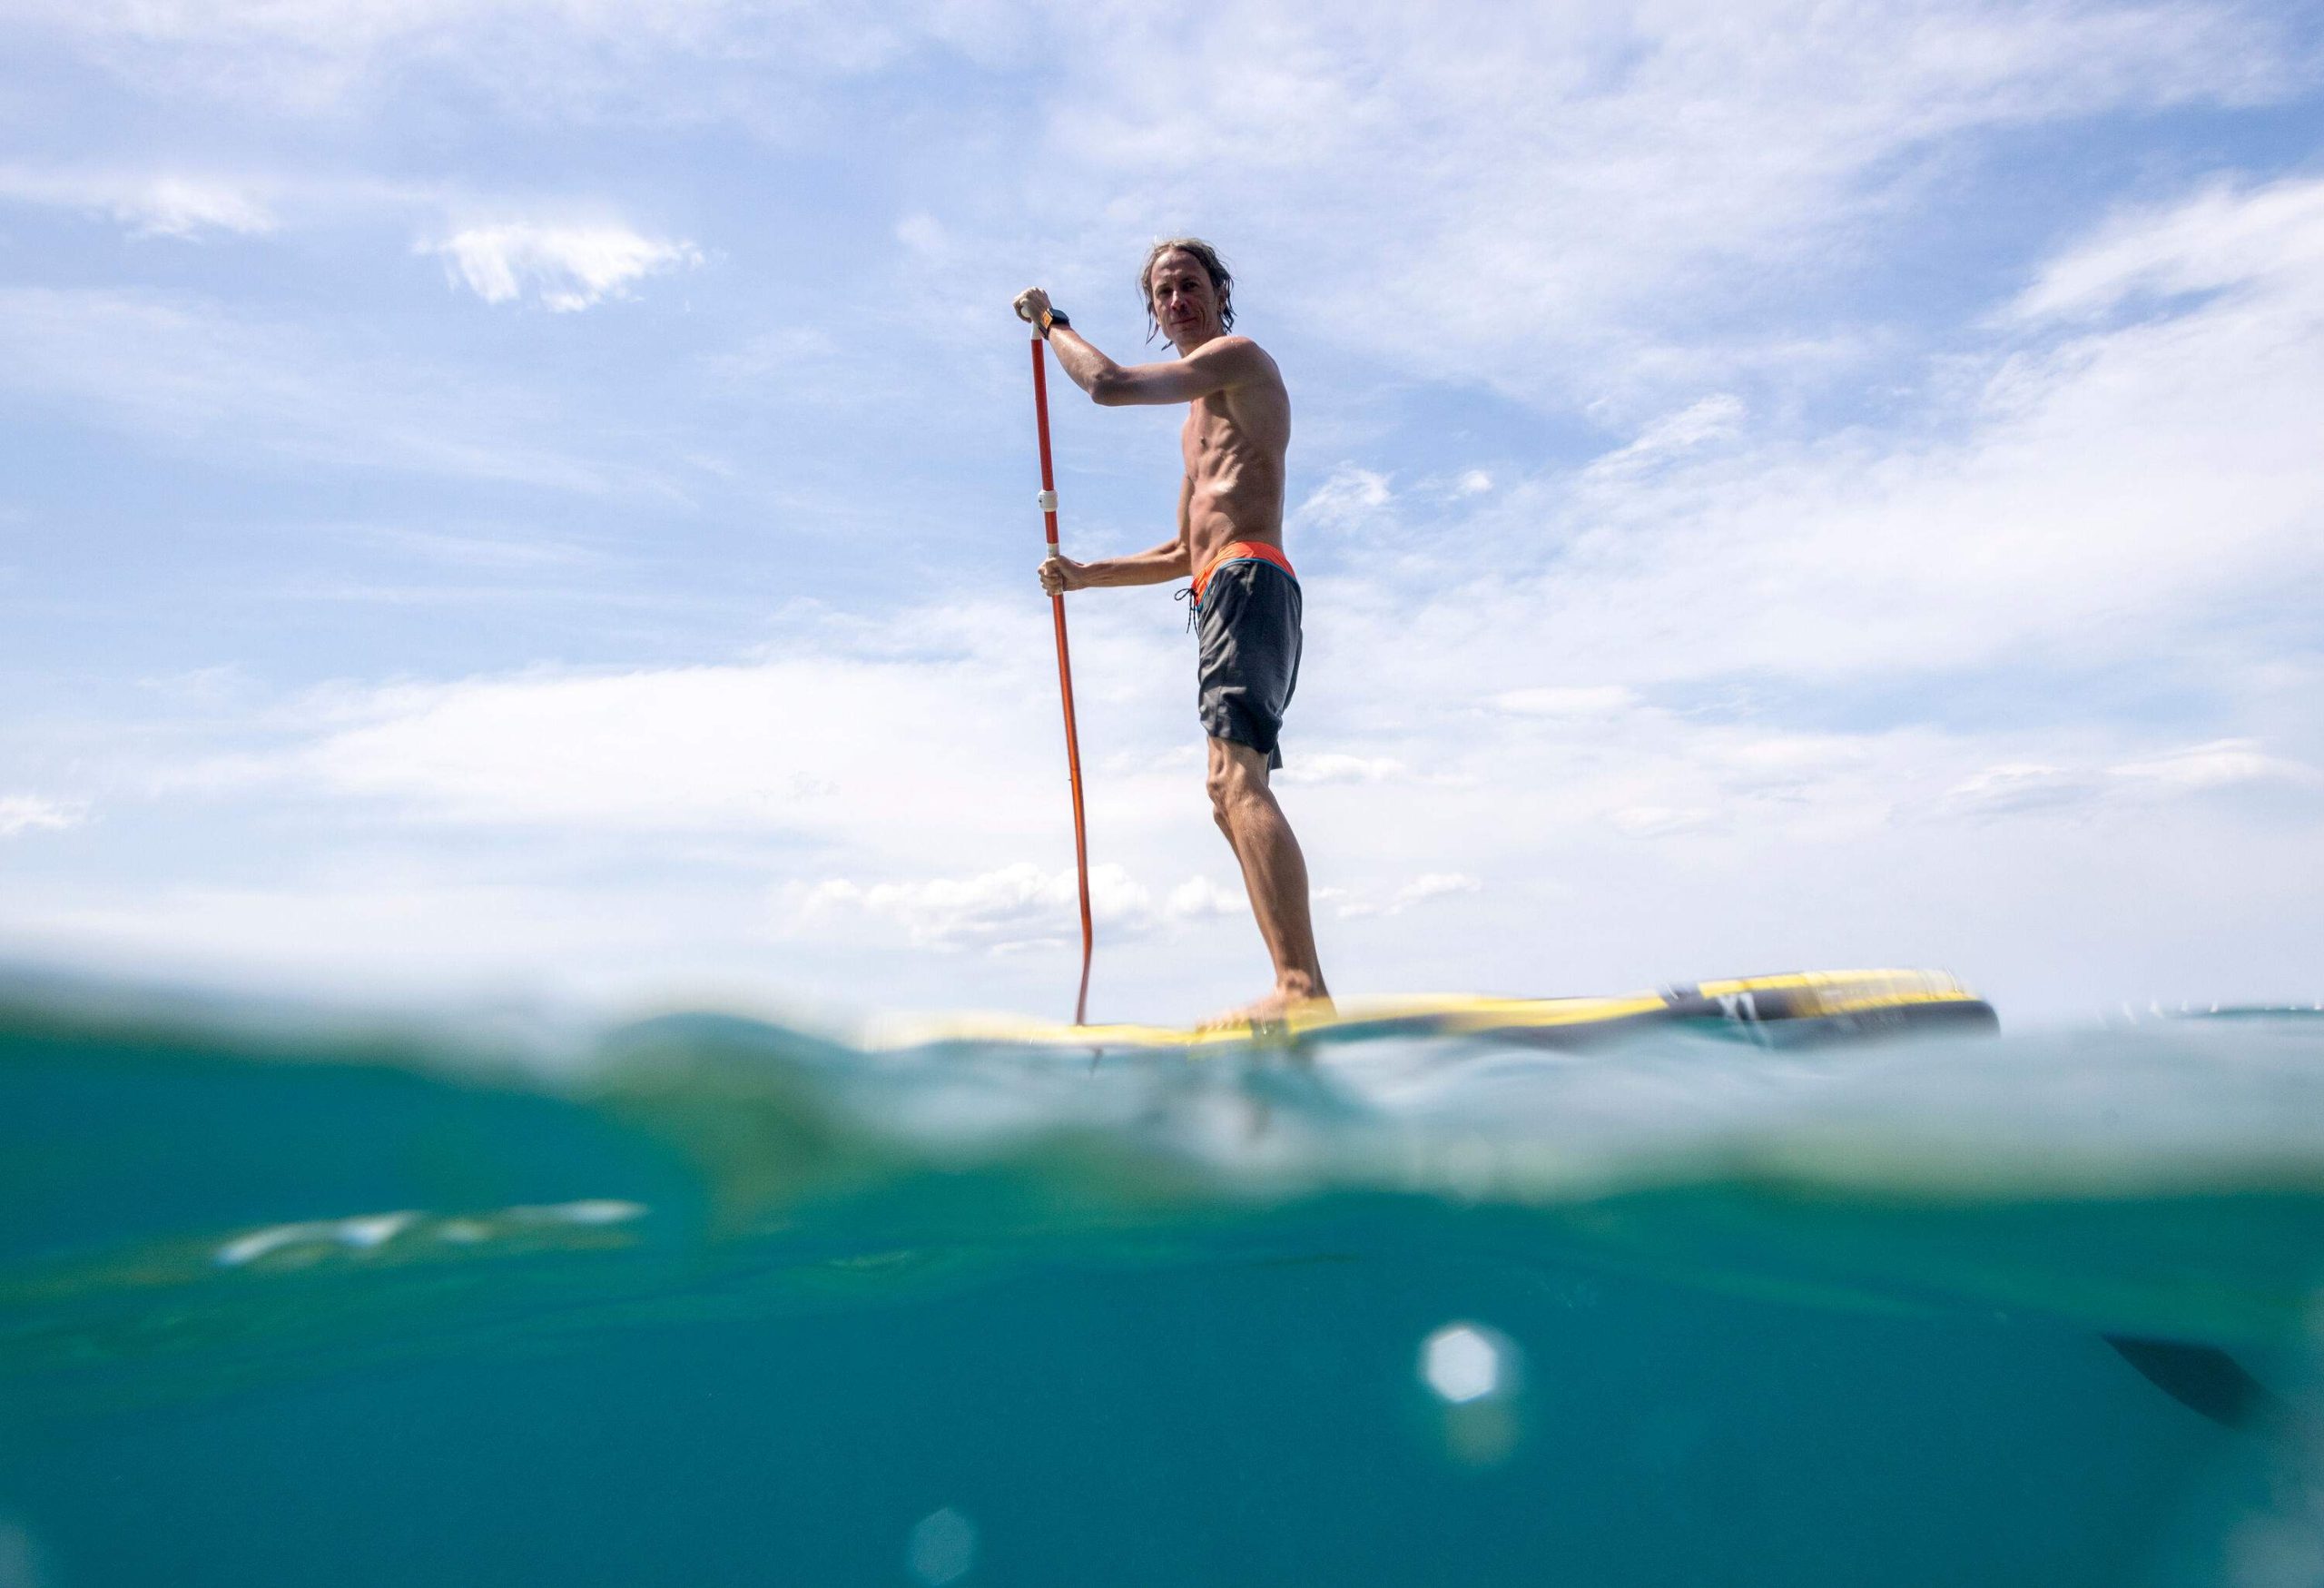 A man stands on a board propels through a paddle above the turquoise water.